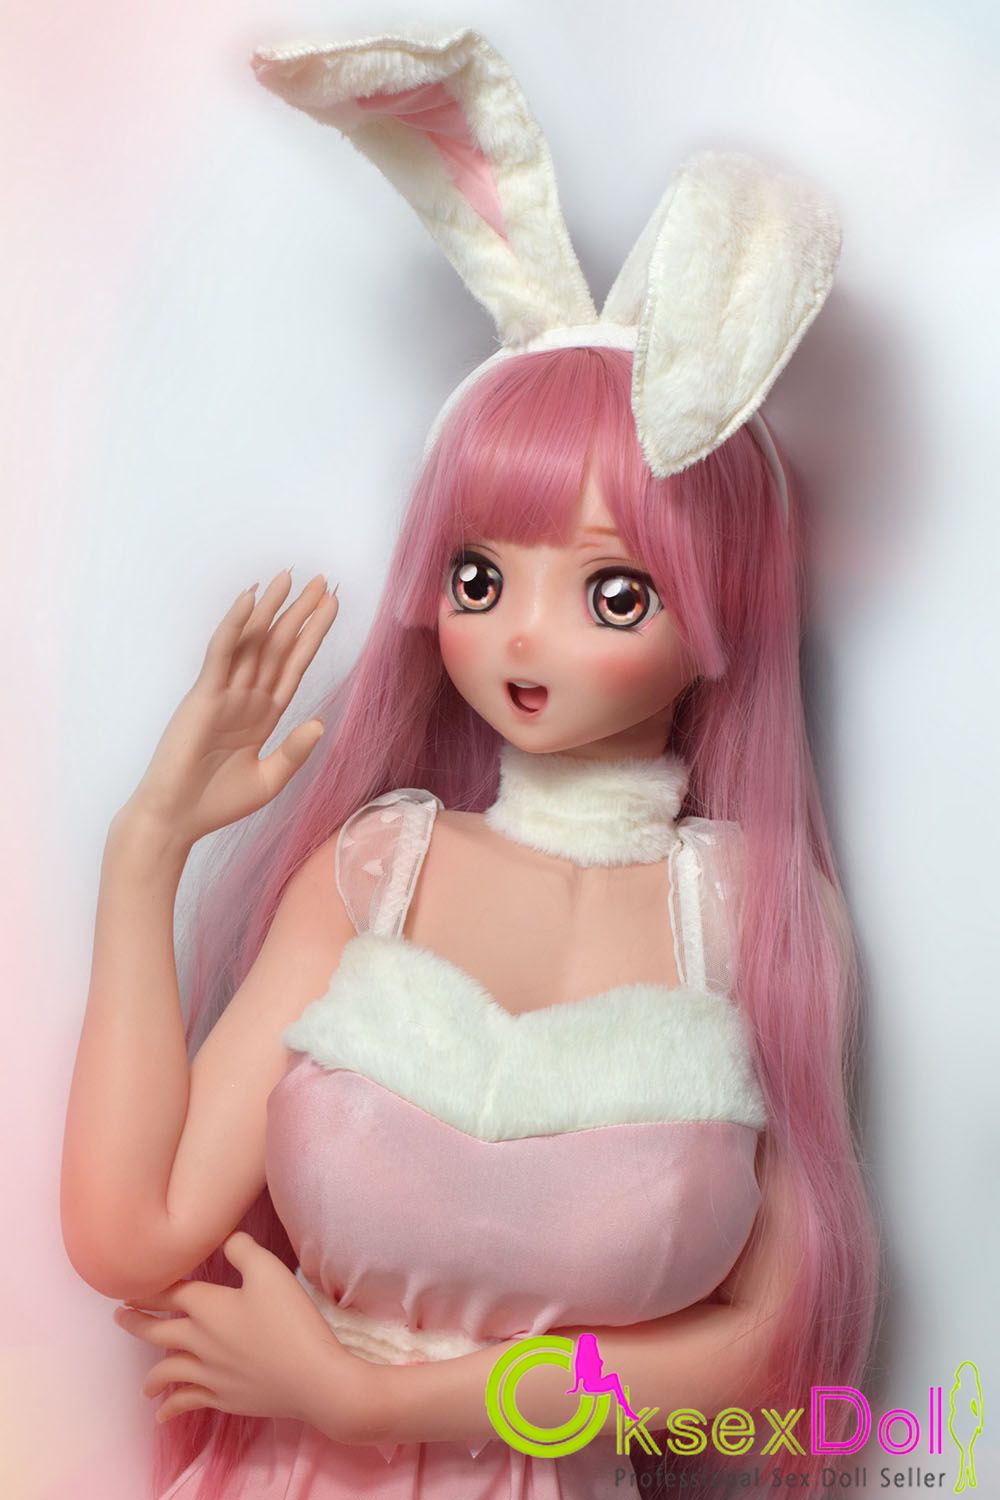 elsababe-doll.html B-cup Real Love Dolls Pictures